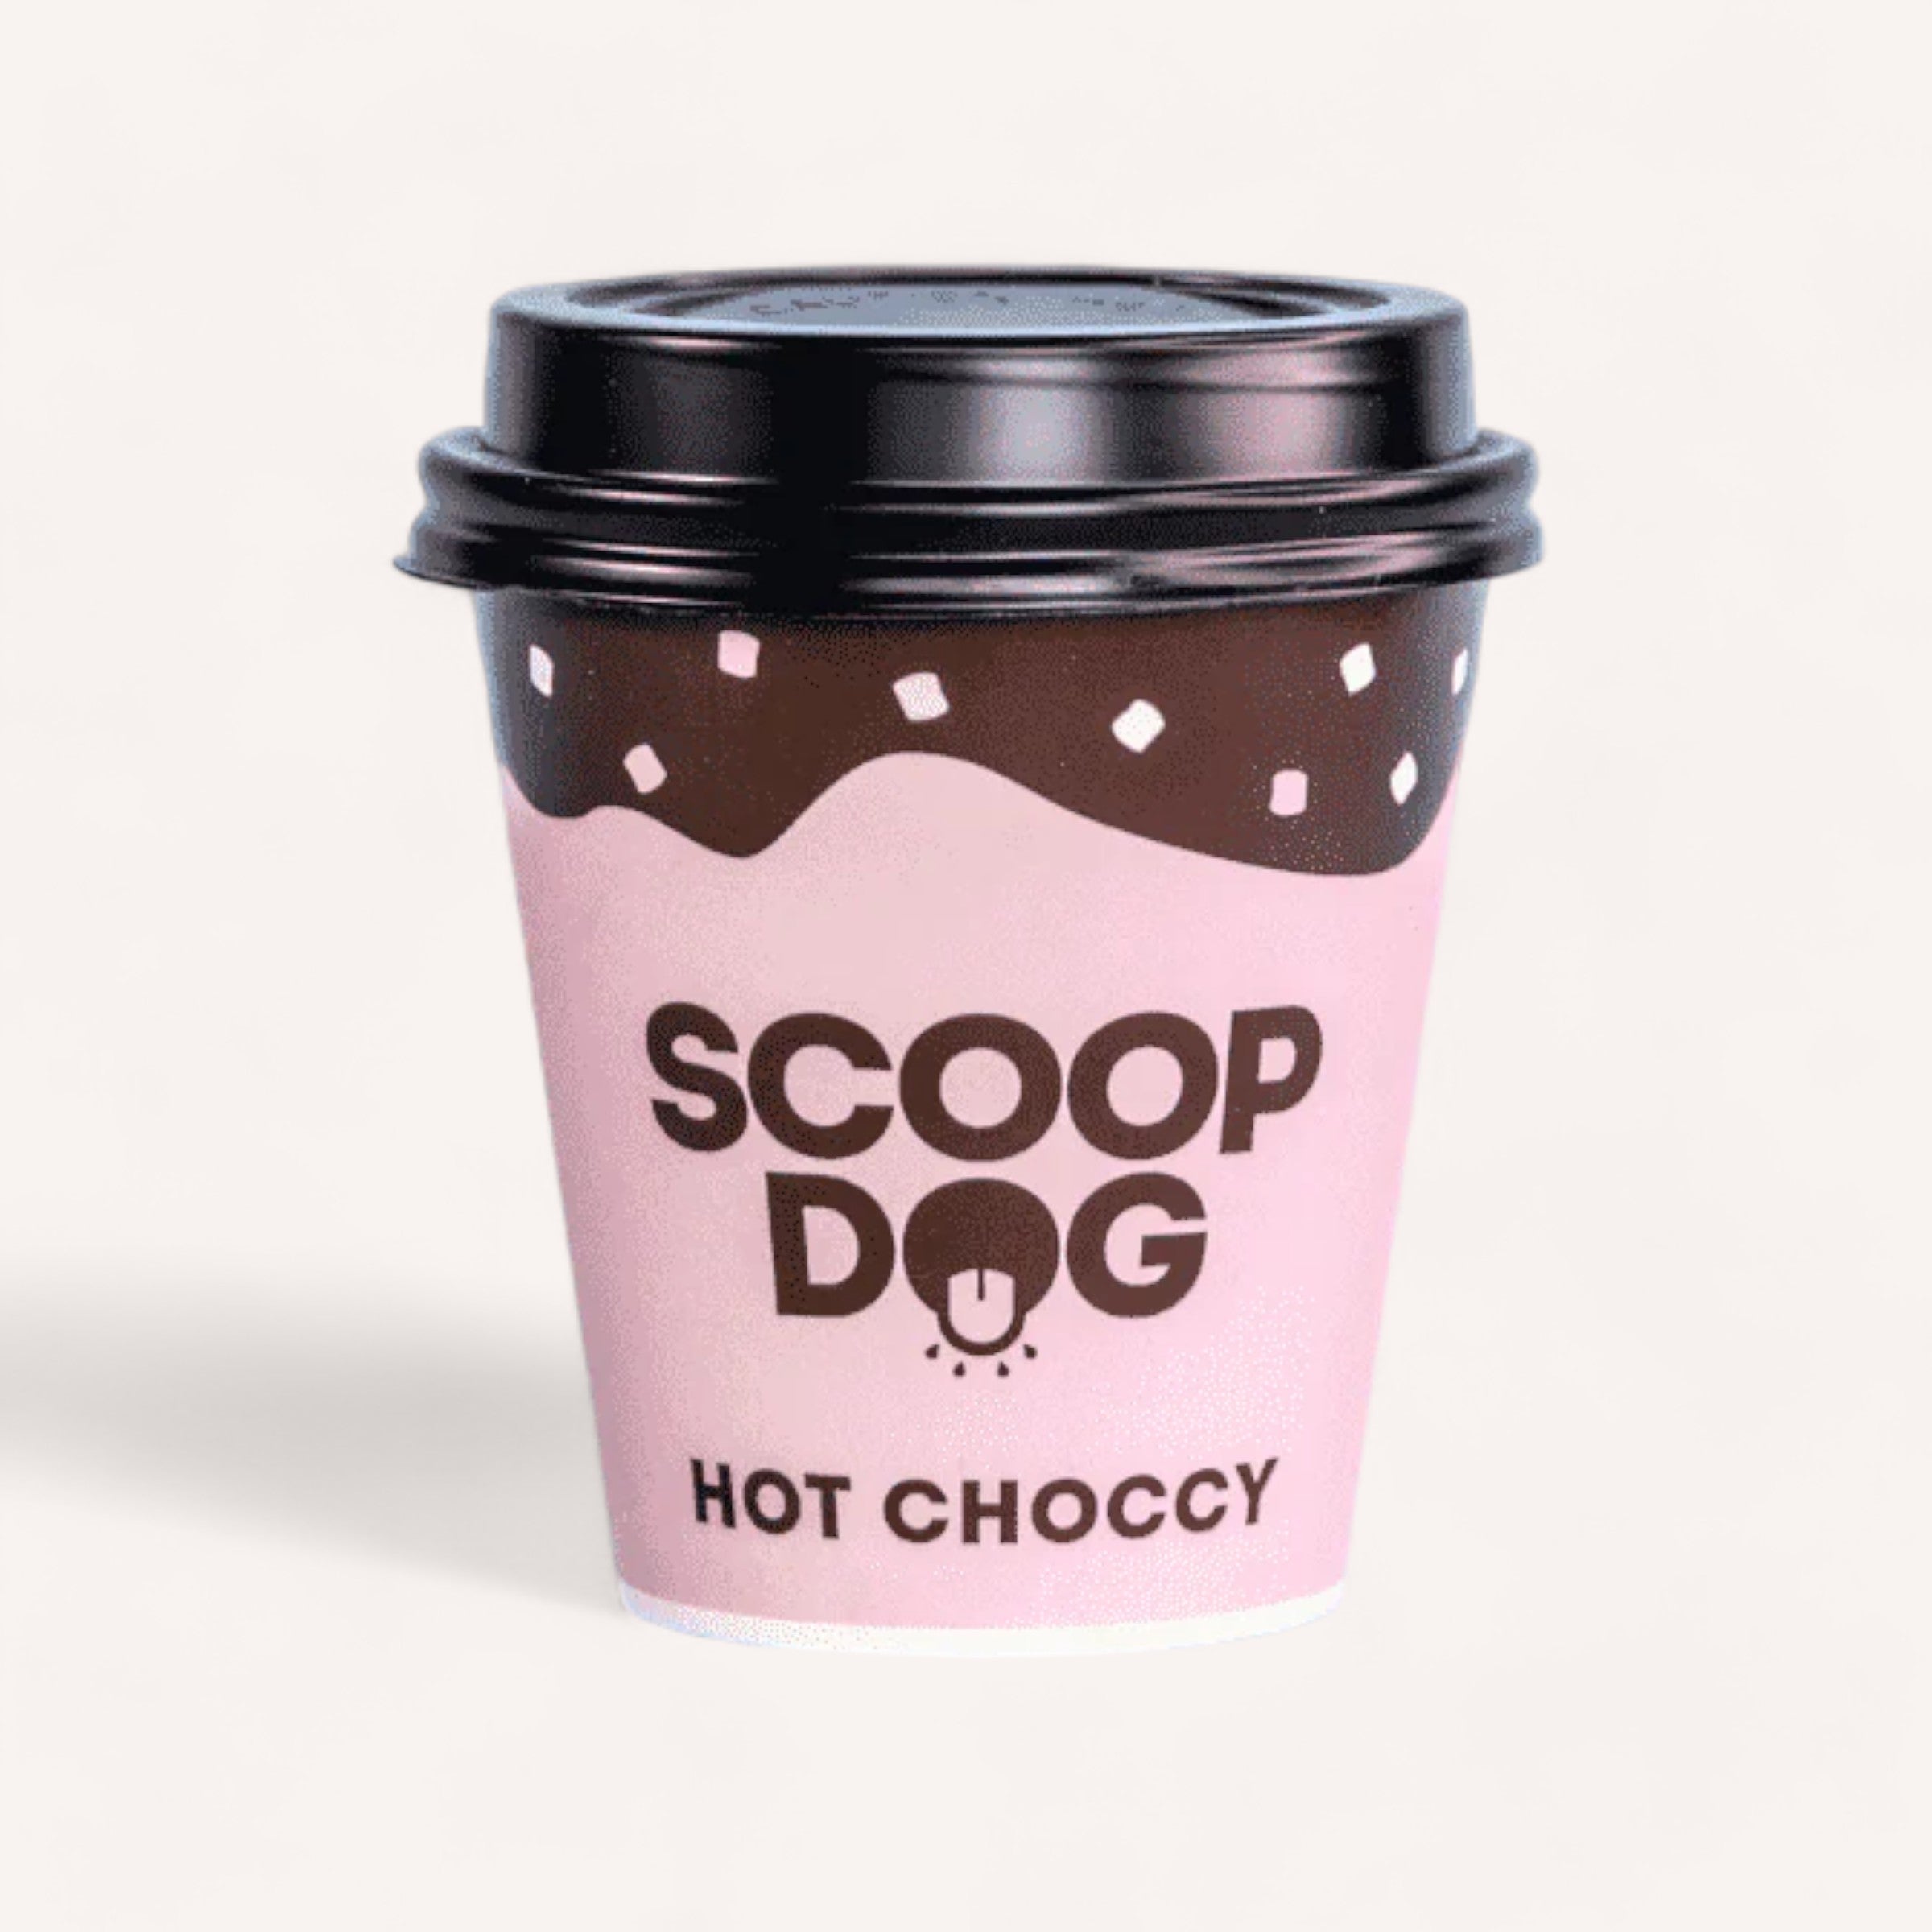 A cute illustrated disposable coffee cup with a pink design, featuring the words "Hot Choccy Dog Drink by Scoop Dog," "hot choccy," and "PAWS" on it, likely containing hot choccy mix.